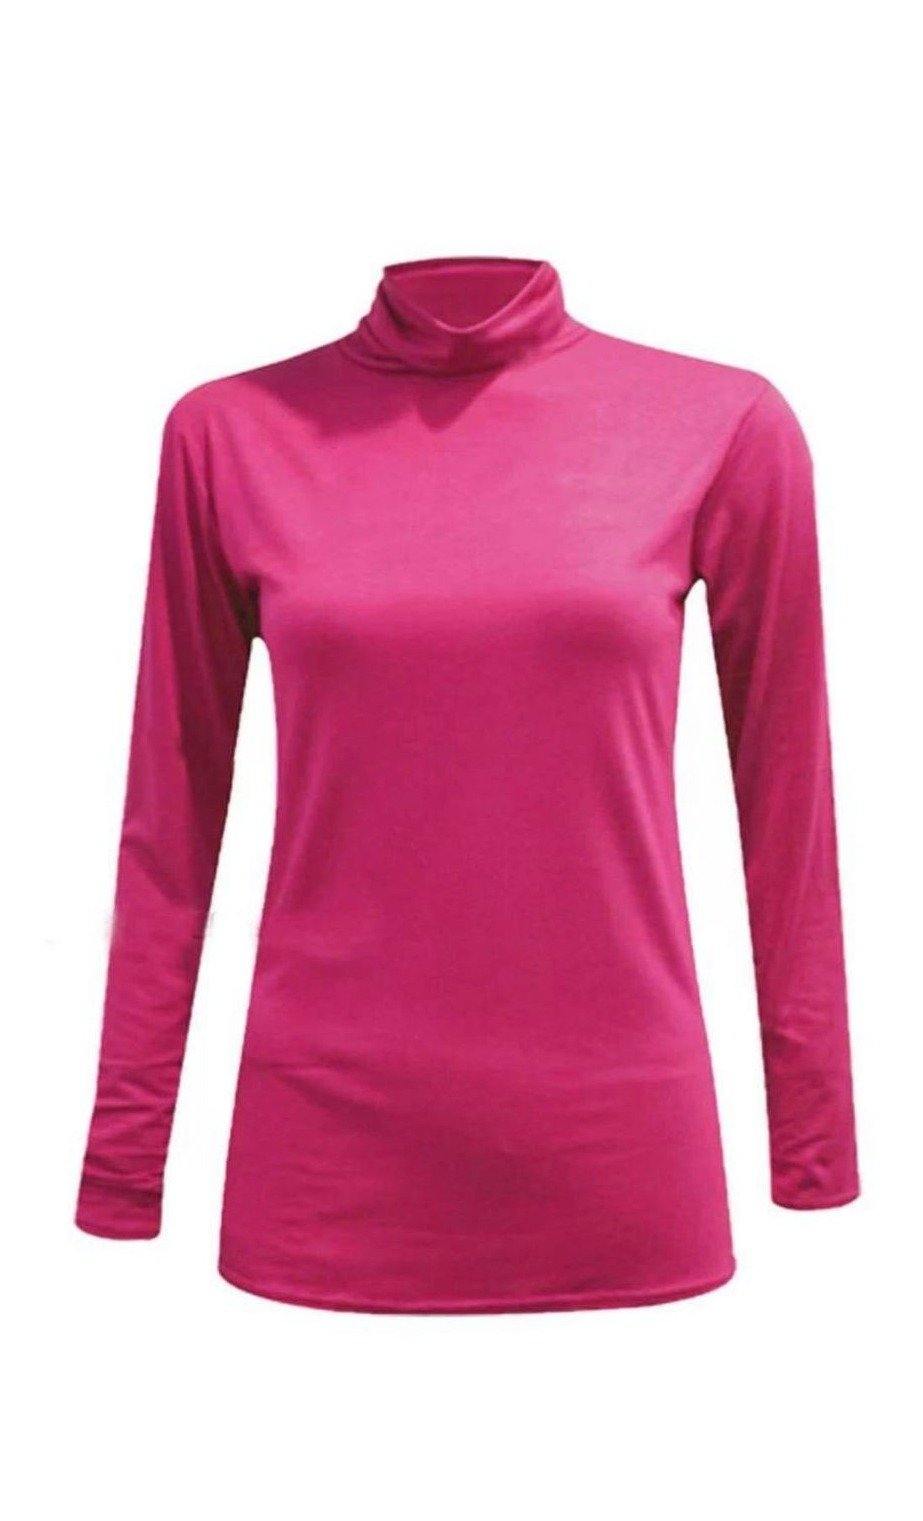 Fuchsia Long Sleeved Jersey Turtle Neck Top